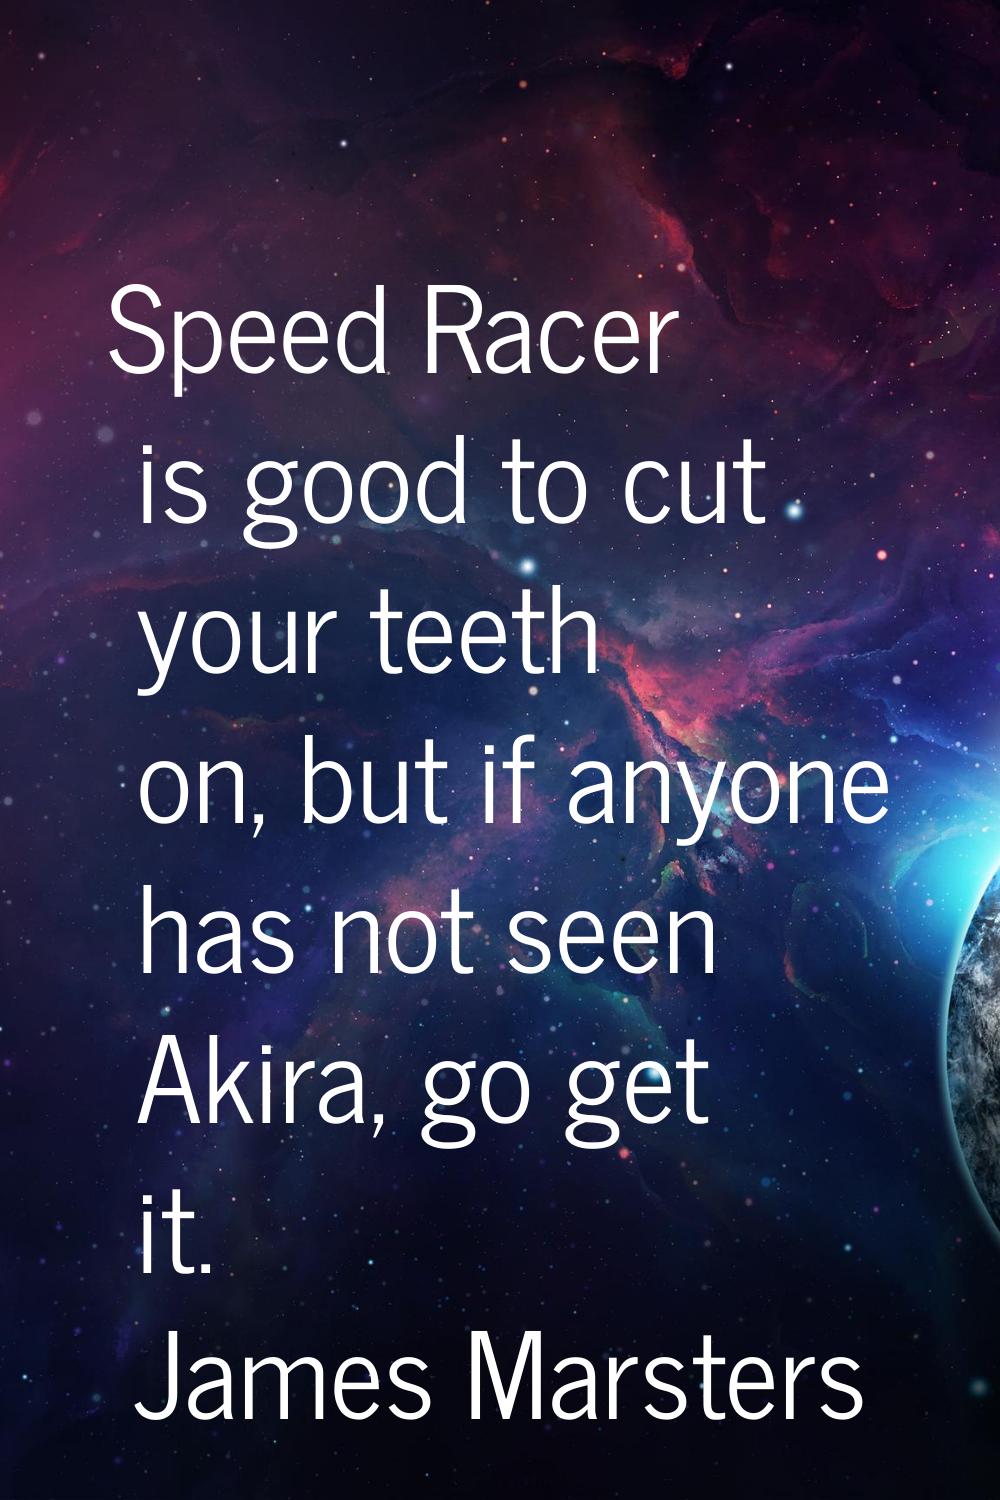 Speed Racer is good to cut your teeth on, but if anyone has not seen Akira, go get it.